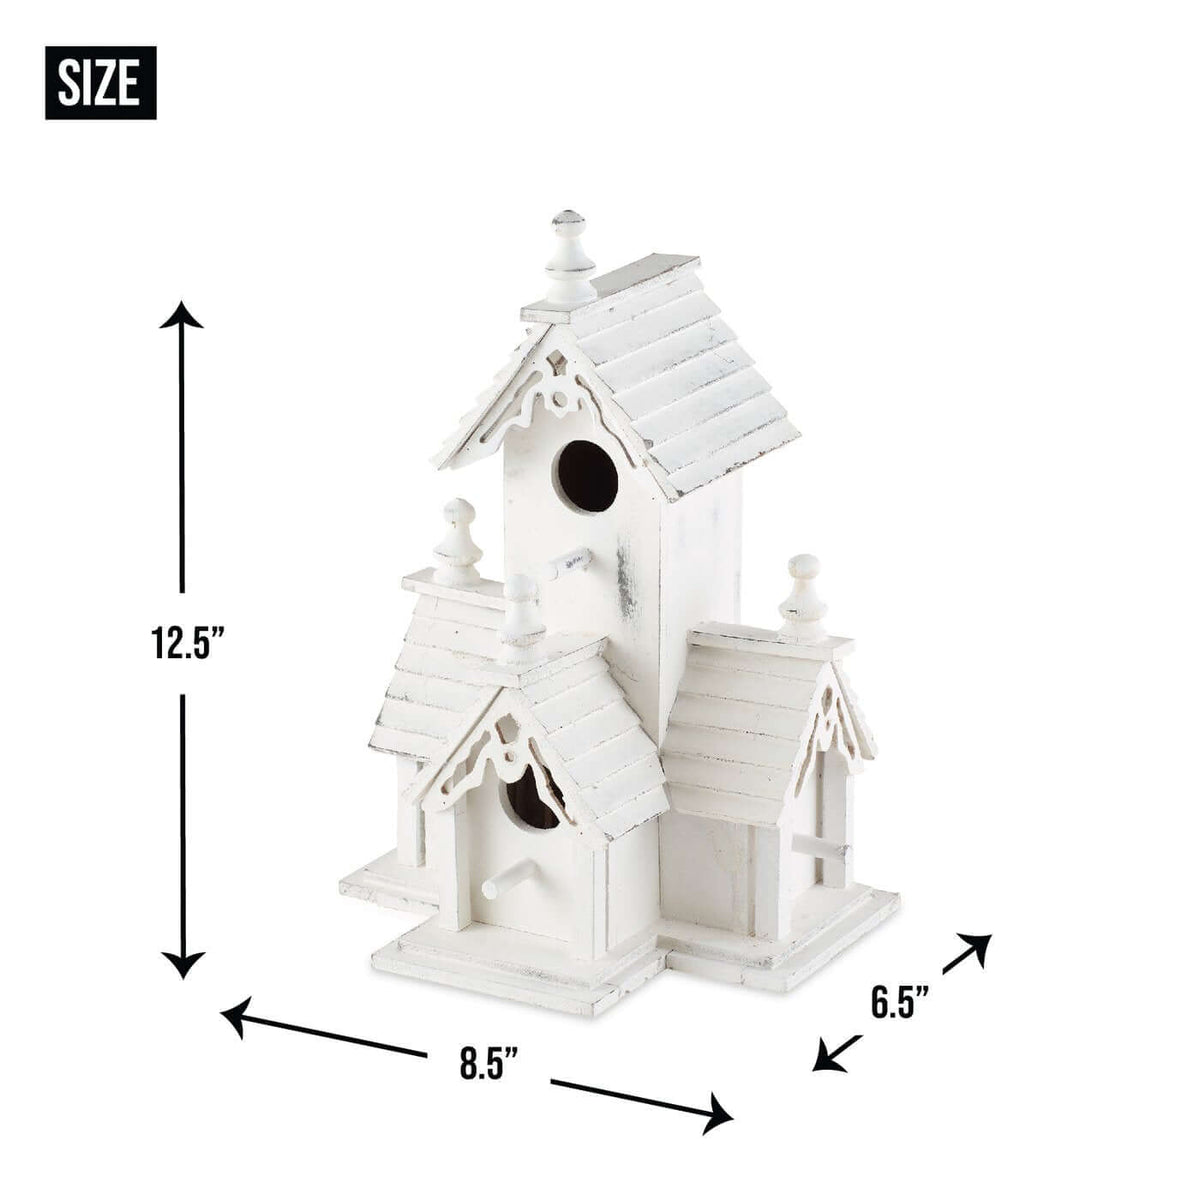 Historic Manor Birdhouse - The House of Awareness